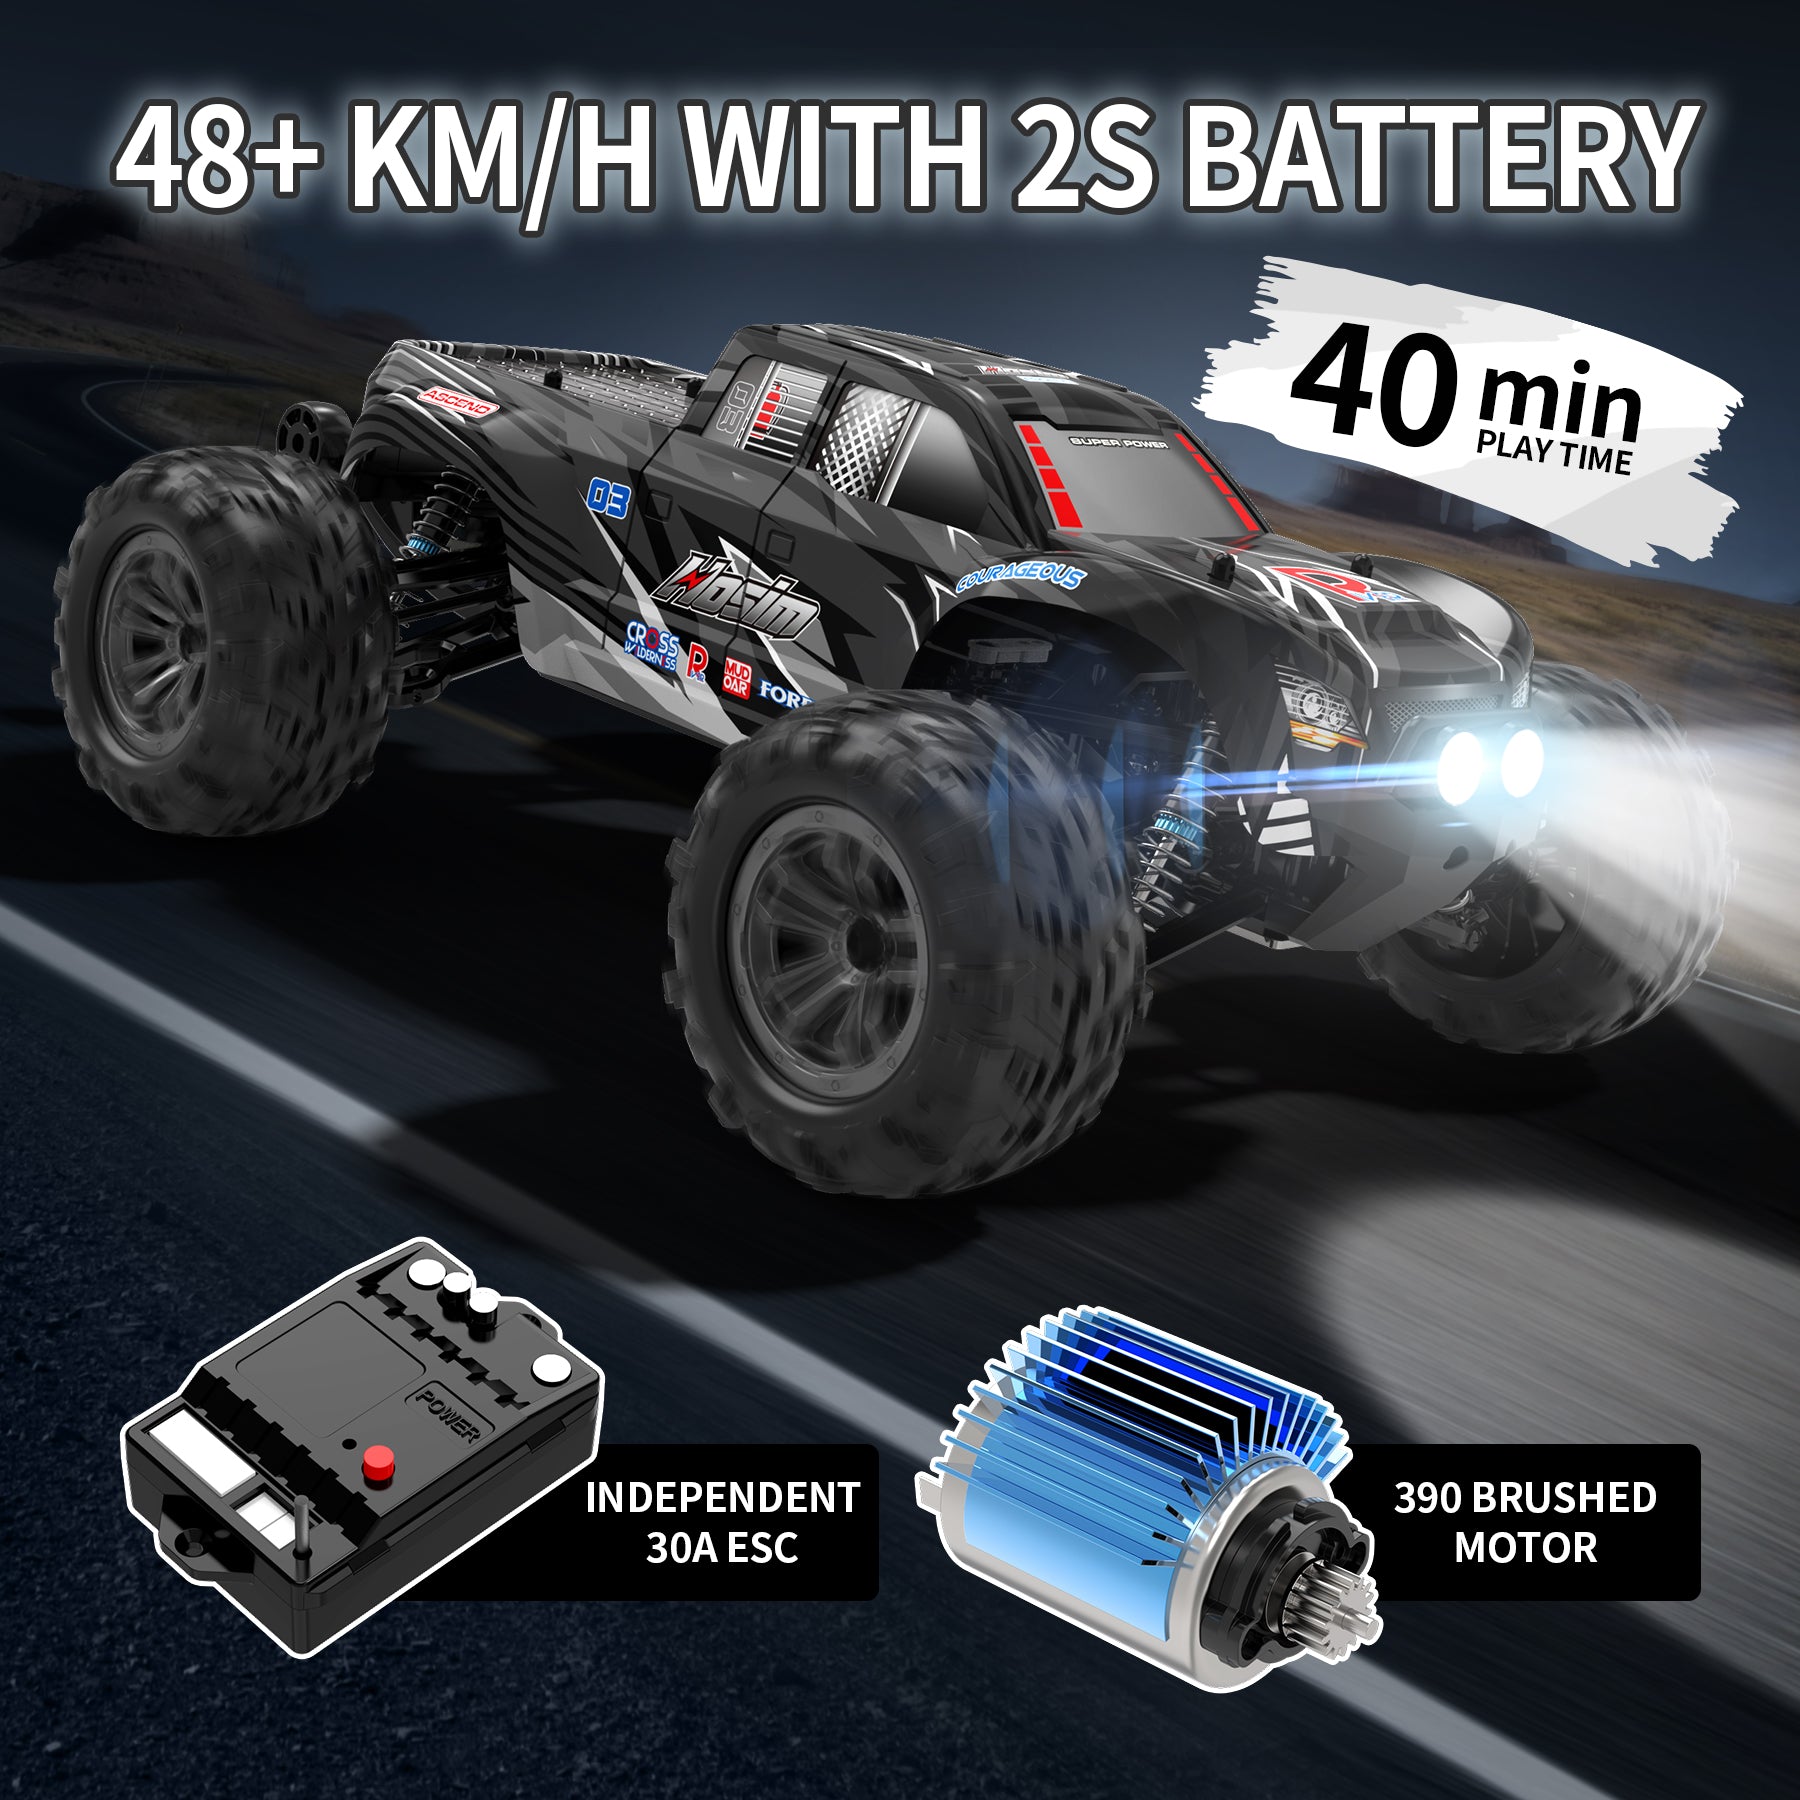 Hosim 1:10 RC Car, High Speed Remote Control Car RC Monster Truck 48+ KMH 4X4 Off-Road RC Truck with Headlights